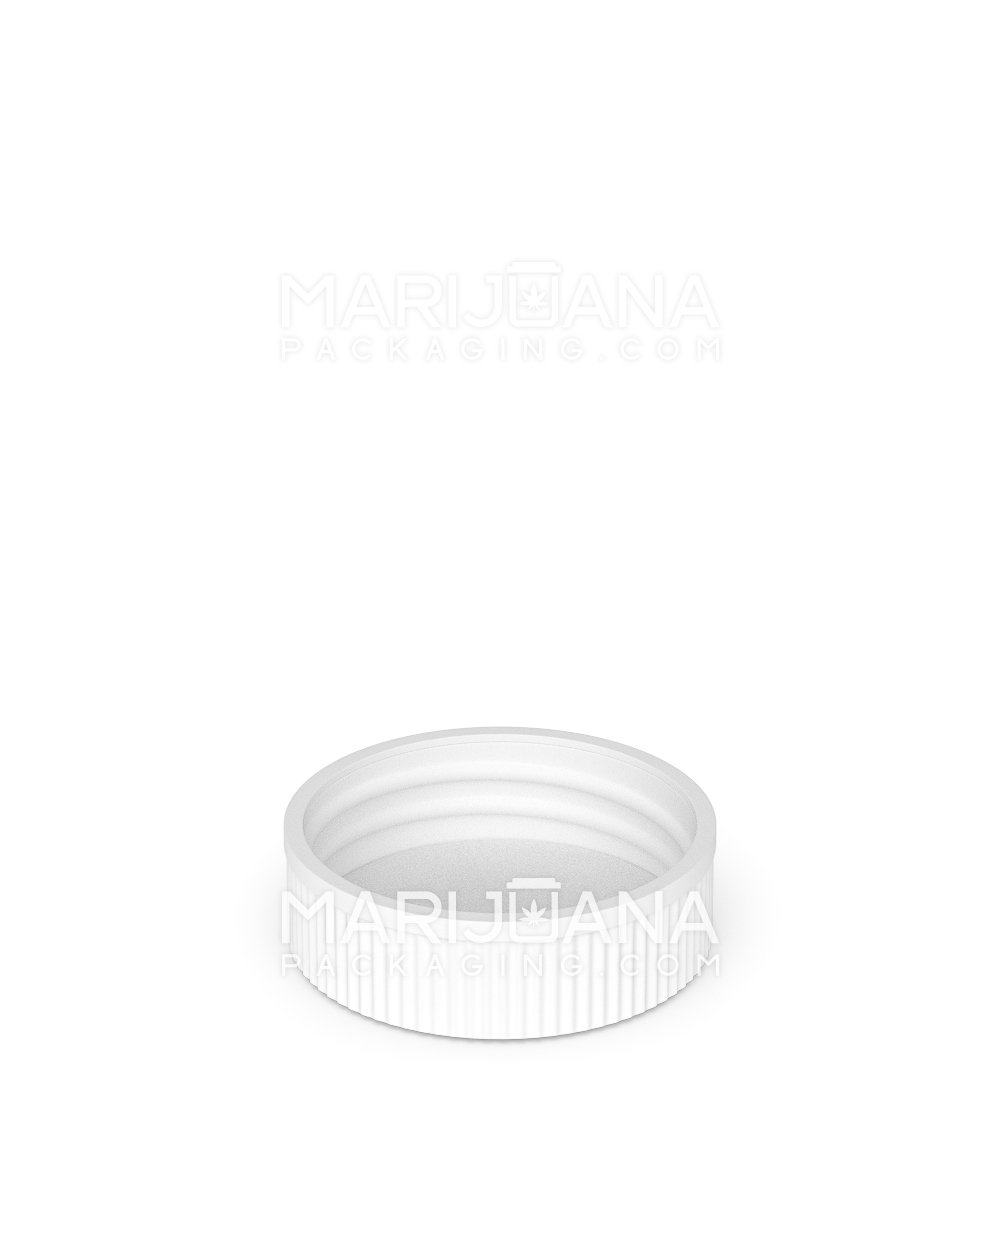 Glass Concentrate Containers with White Cap | 28mm - 5mL - 250 Count - 7